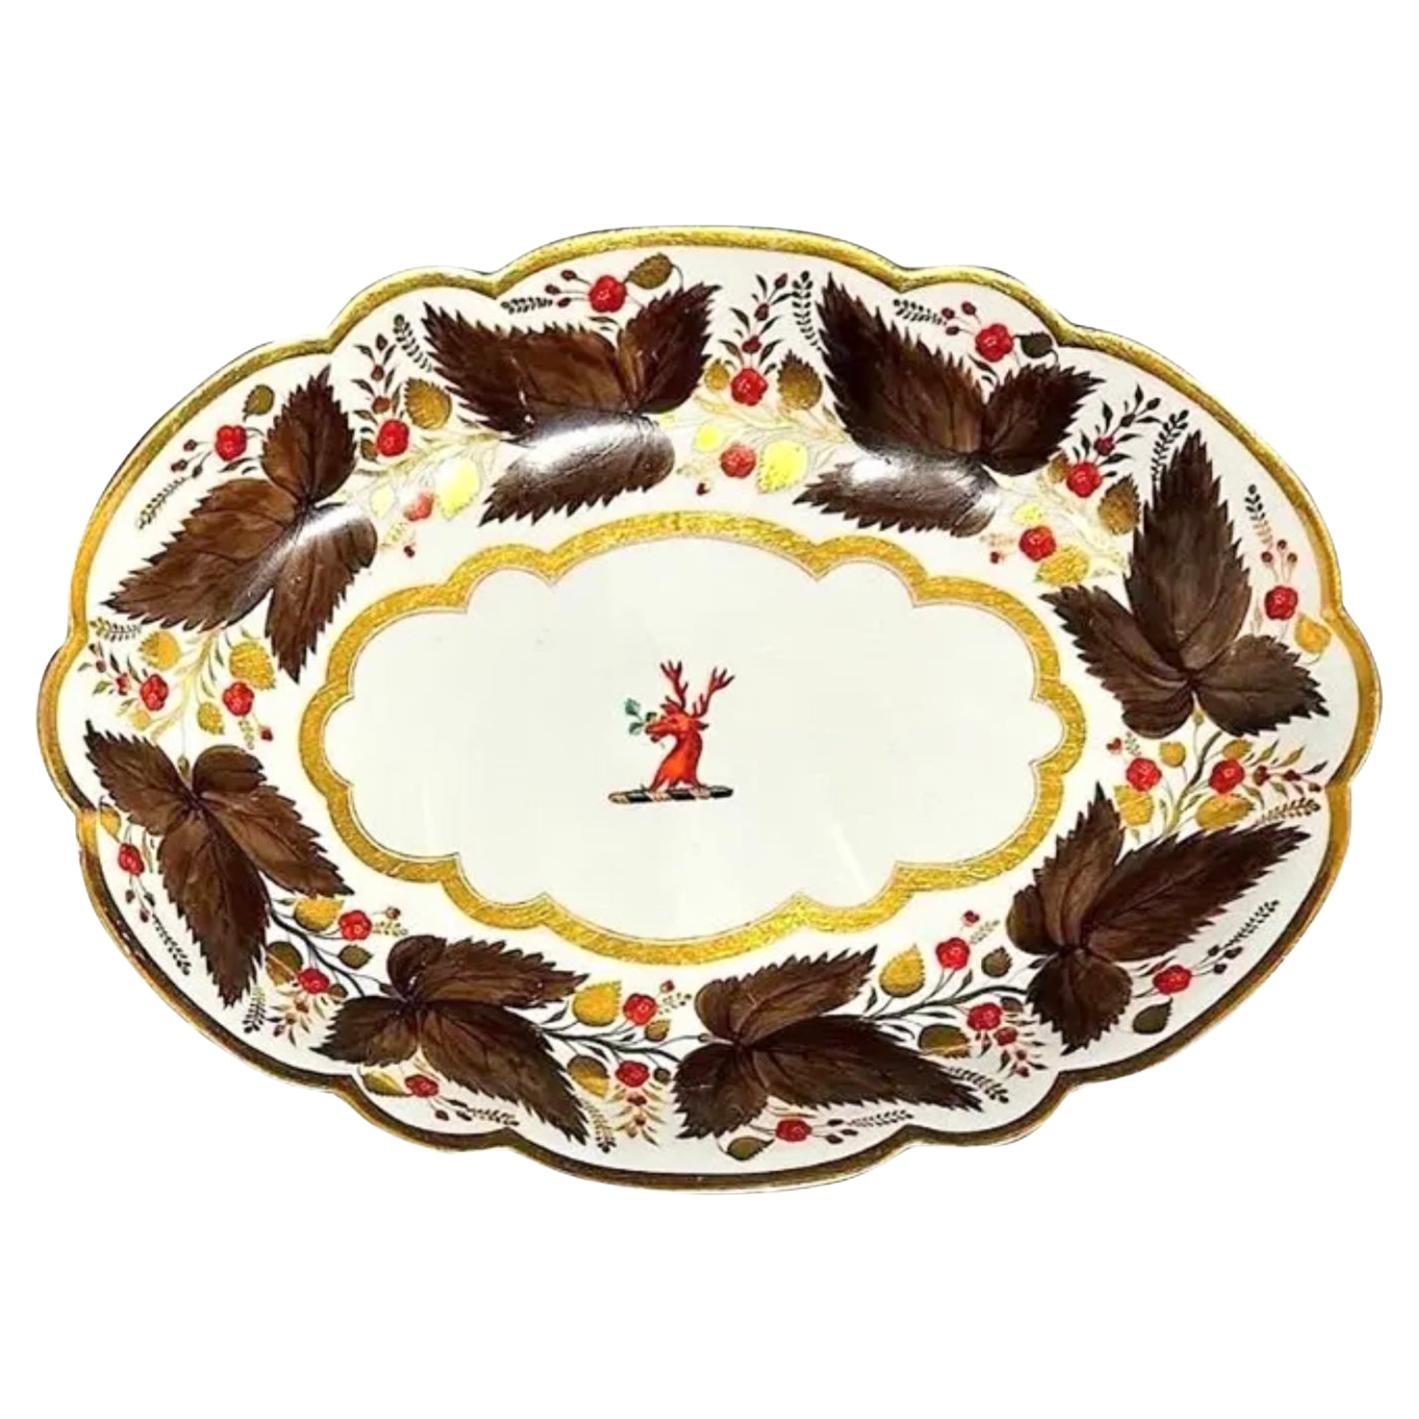 Flight Barr & Barr Oval Platter or Tray w Brown Vines & Berries, 1815-1820 For Sale